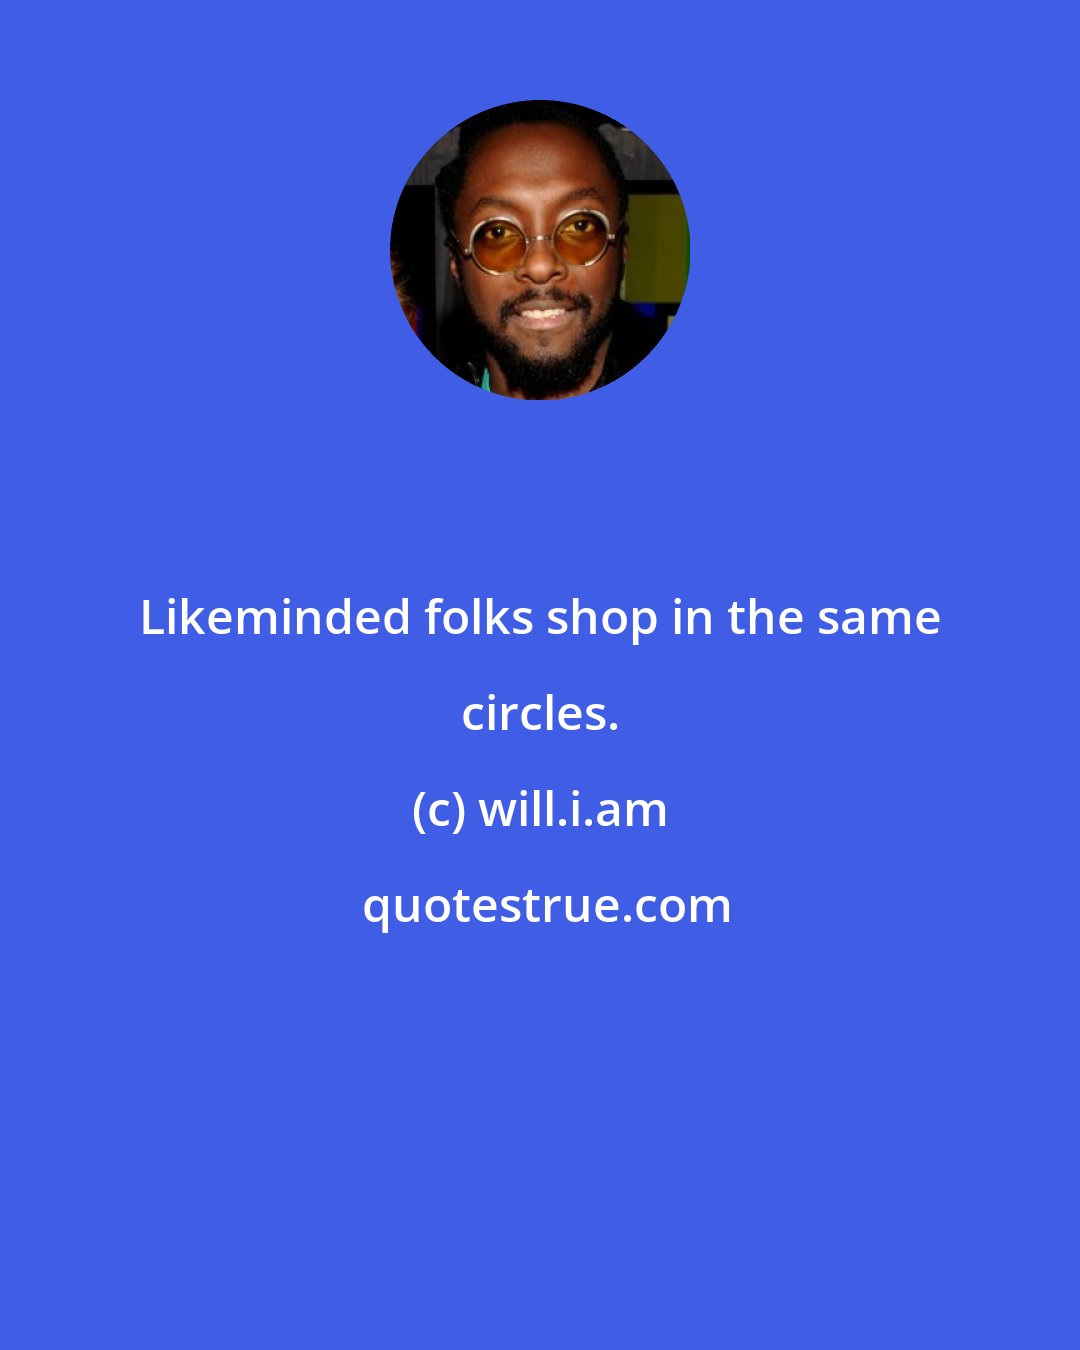 will.i.am: Likeminded folks shop in the same circles.